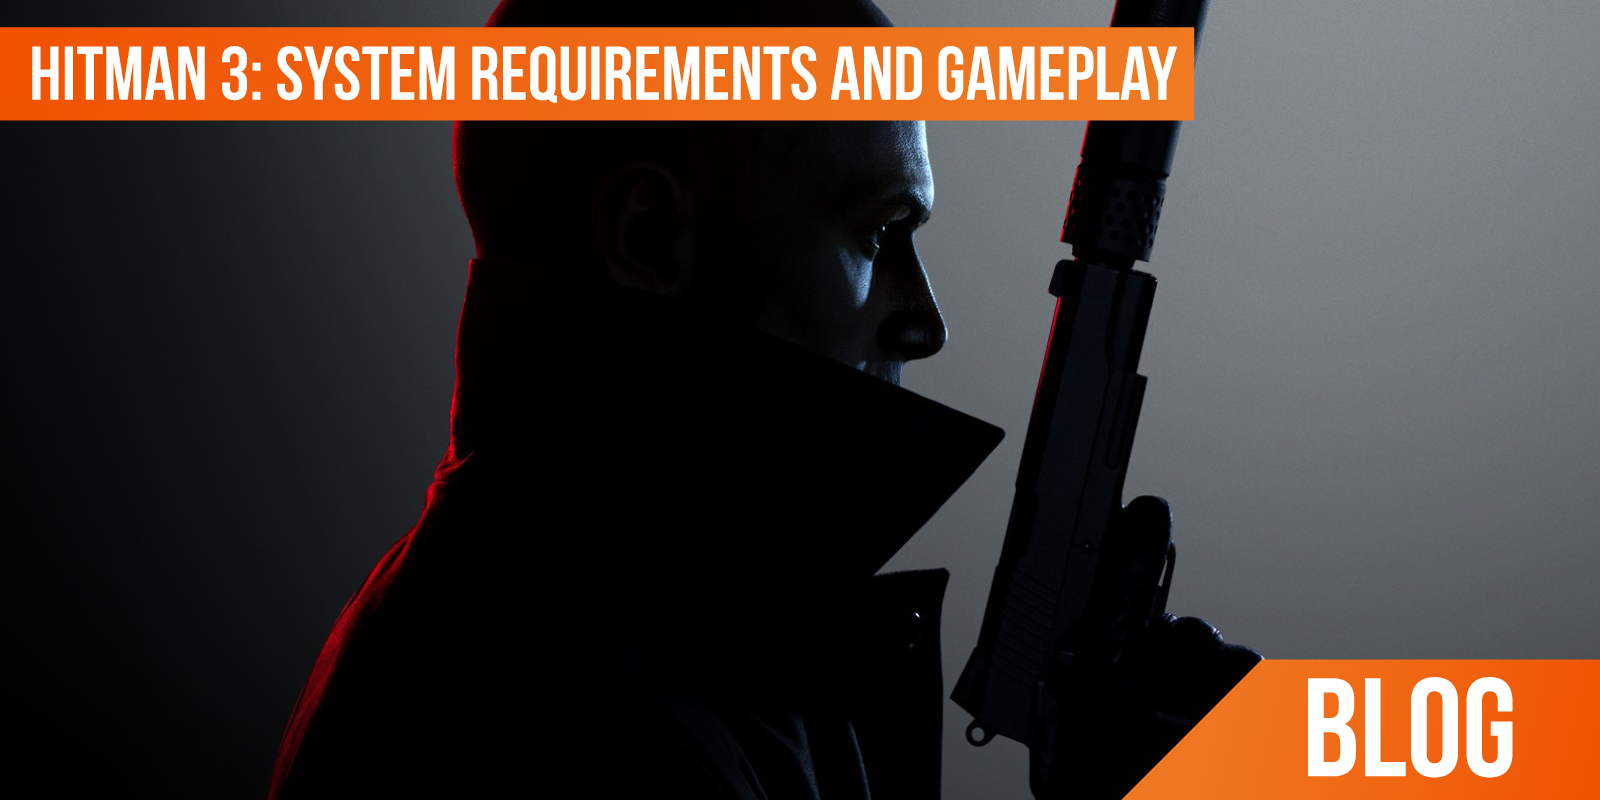 Hitman 3 FREE Starter Pack system requirements